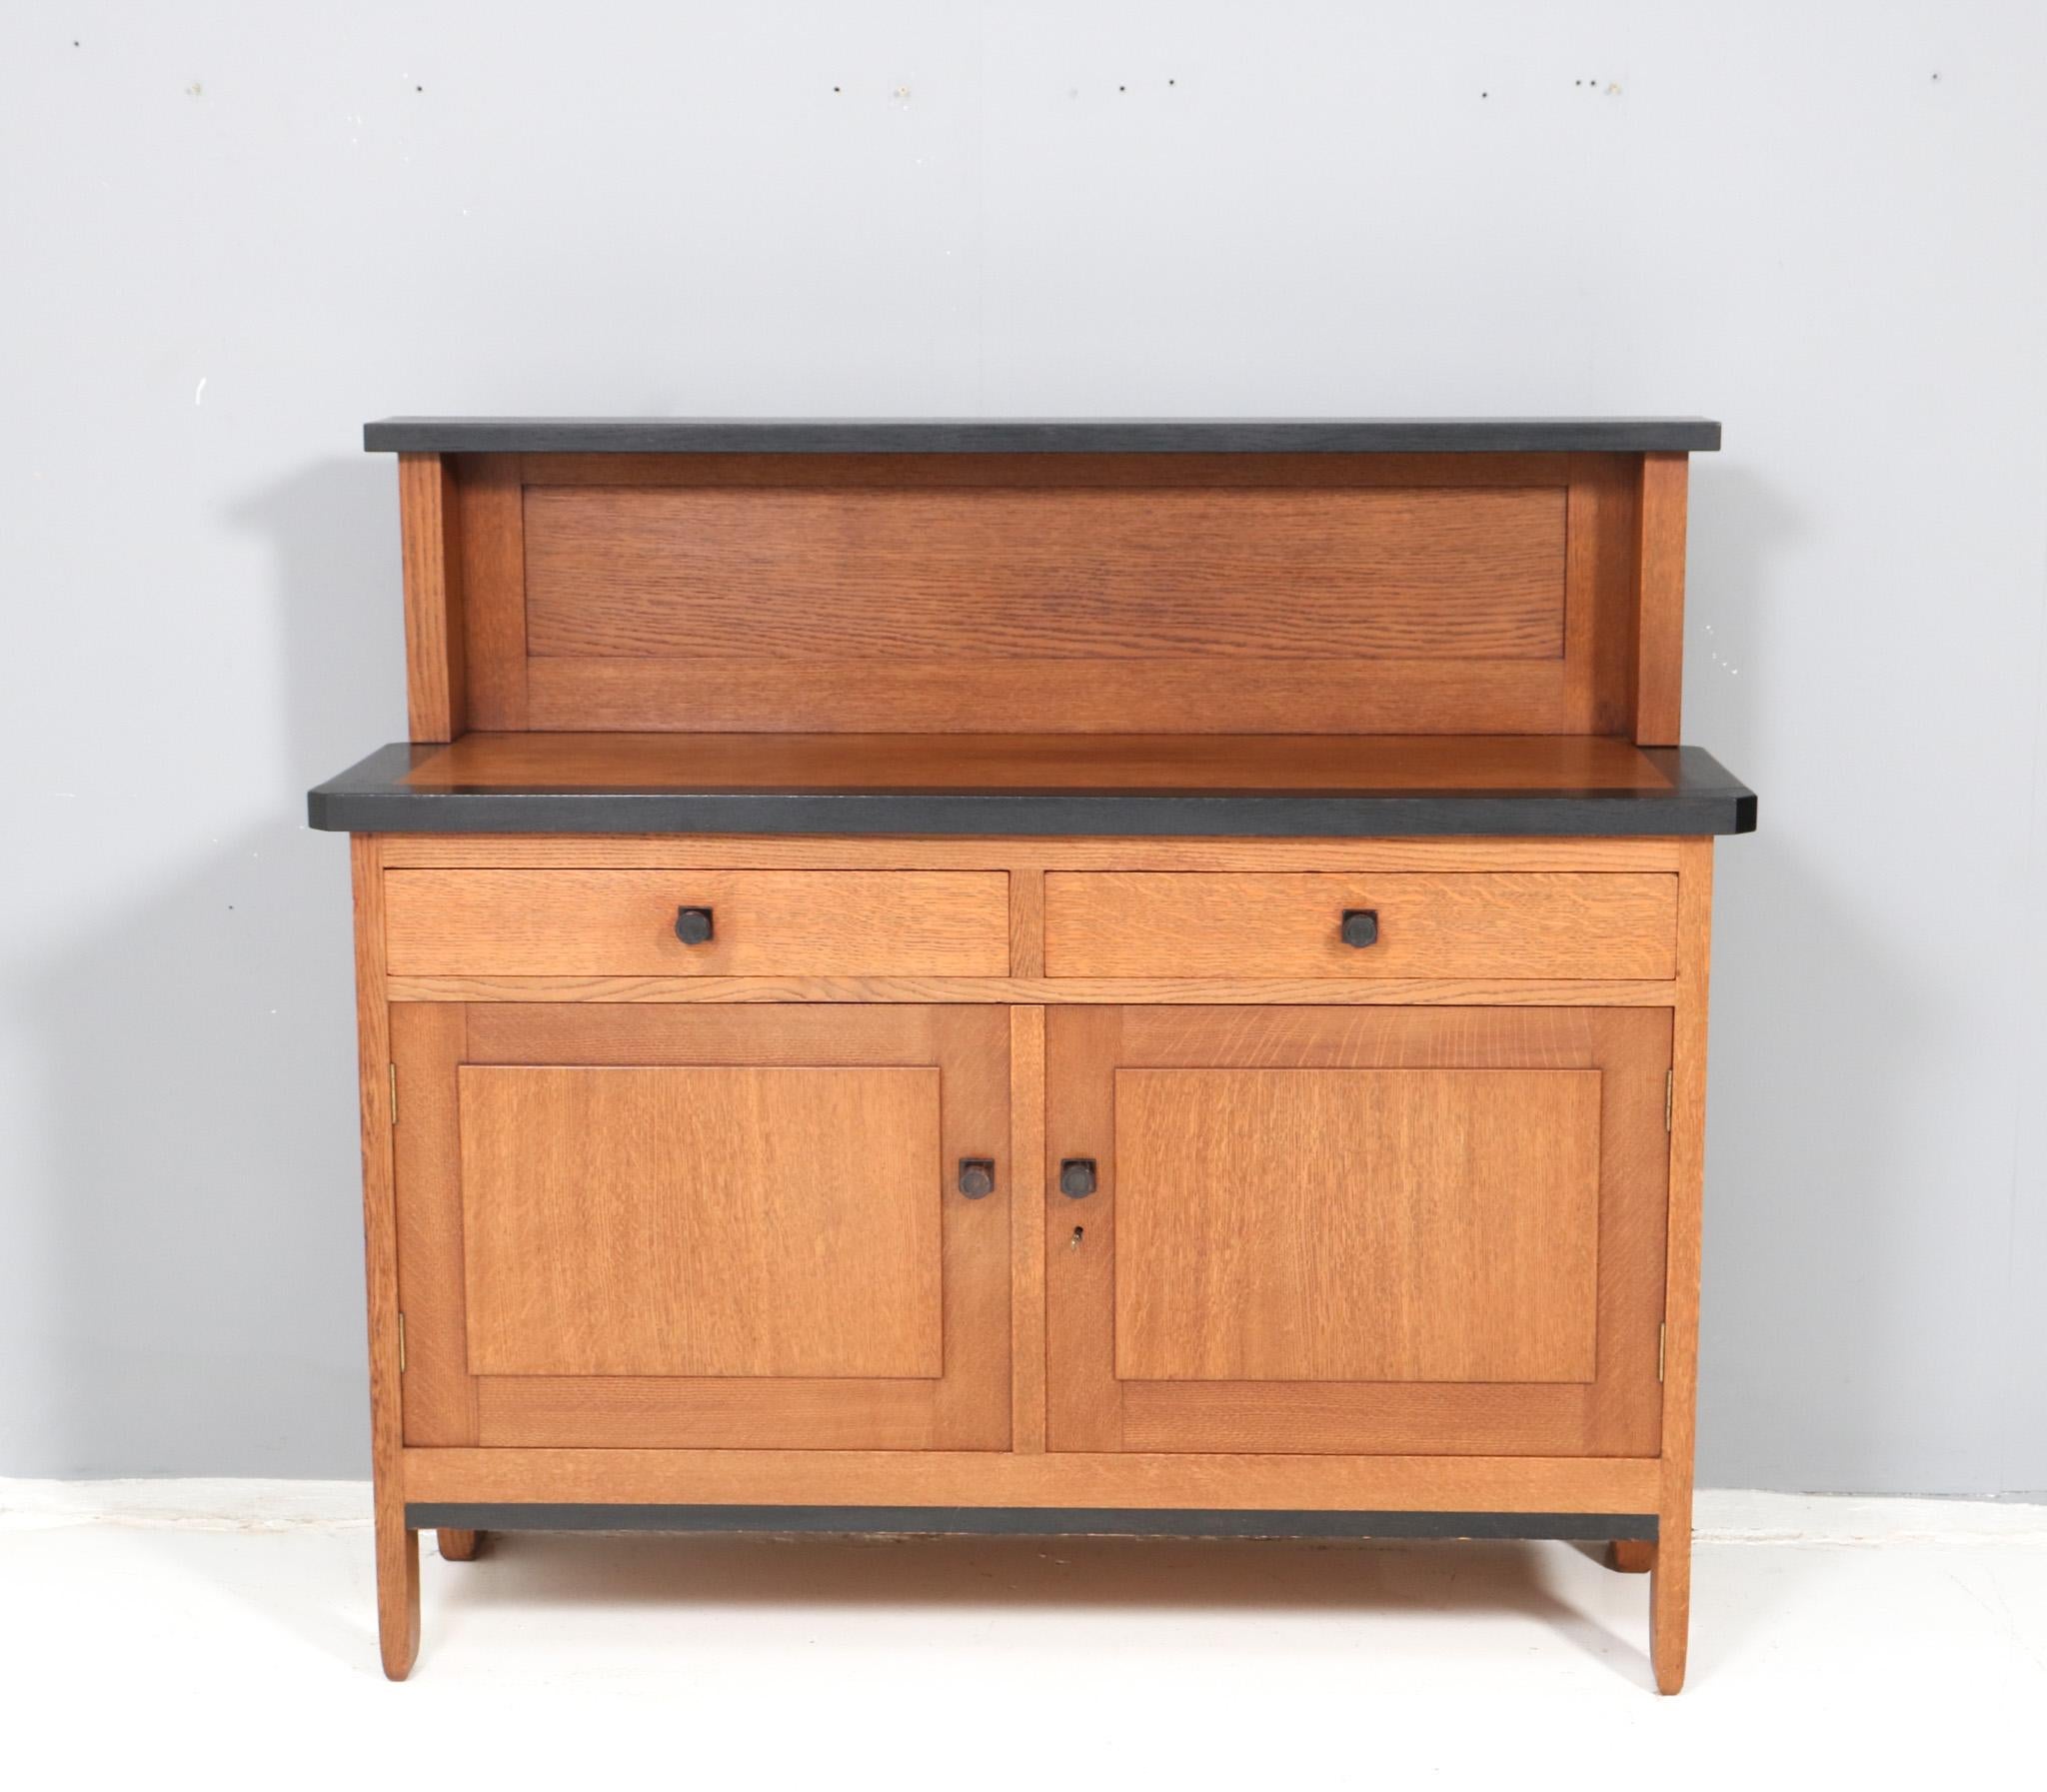 Magnificent and rare Art Deco Modernist credenza or sideboard.
Design by H. Fels for L.O.V. Oosterbeek.
Striking Dutch design from the 1920s.
Solid oak base with original black lacquered elements.
Marked with original manufacturers tag.
In very good